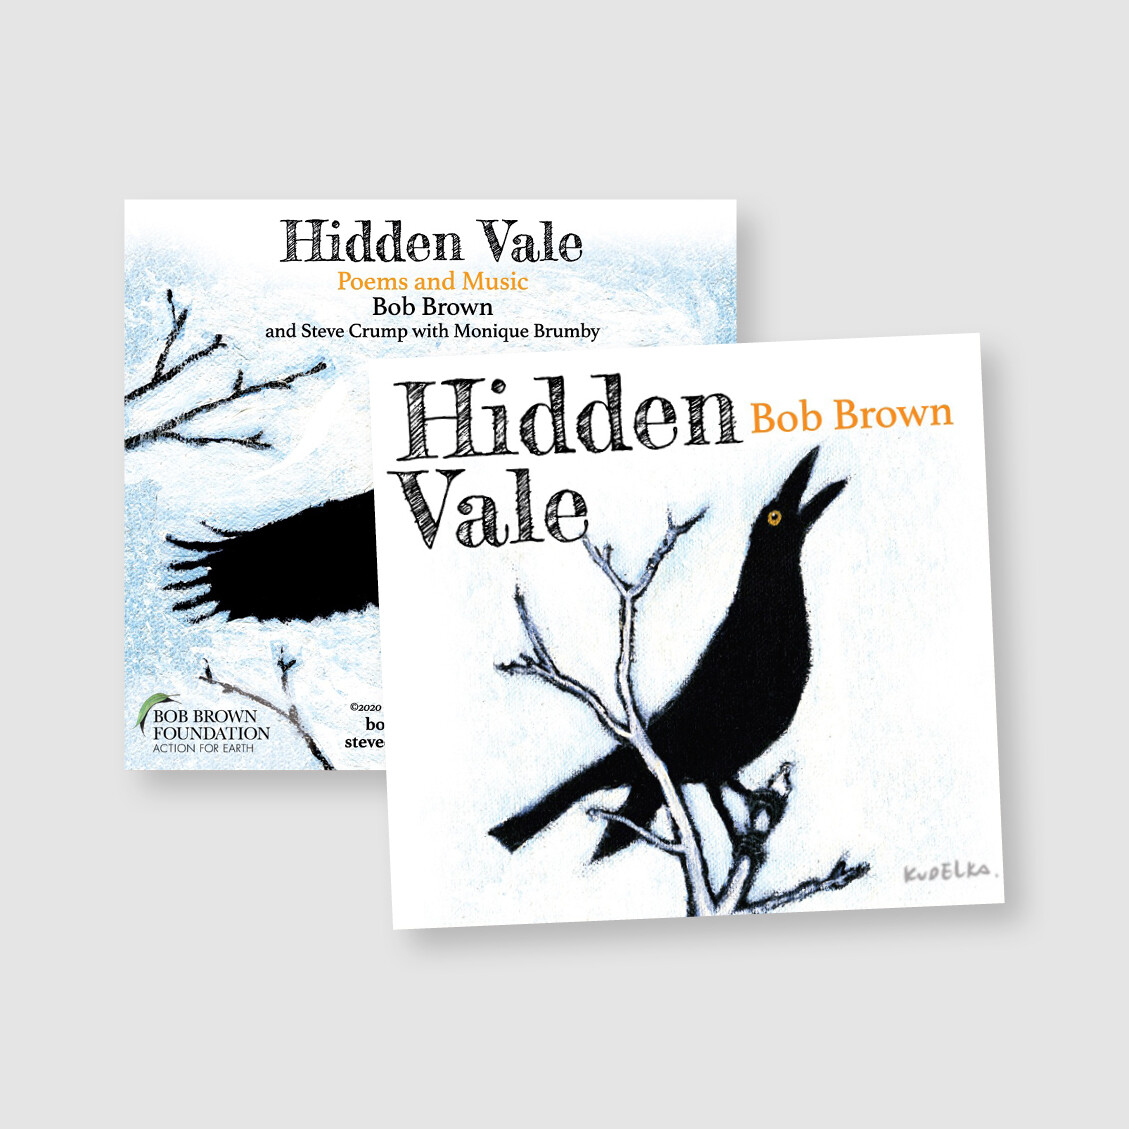 CD and Download Code: Hidden Vale – Bob Brown and Steve Crump